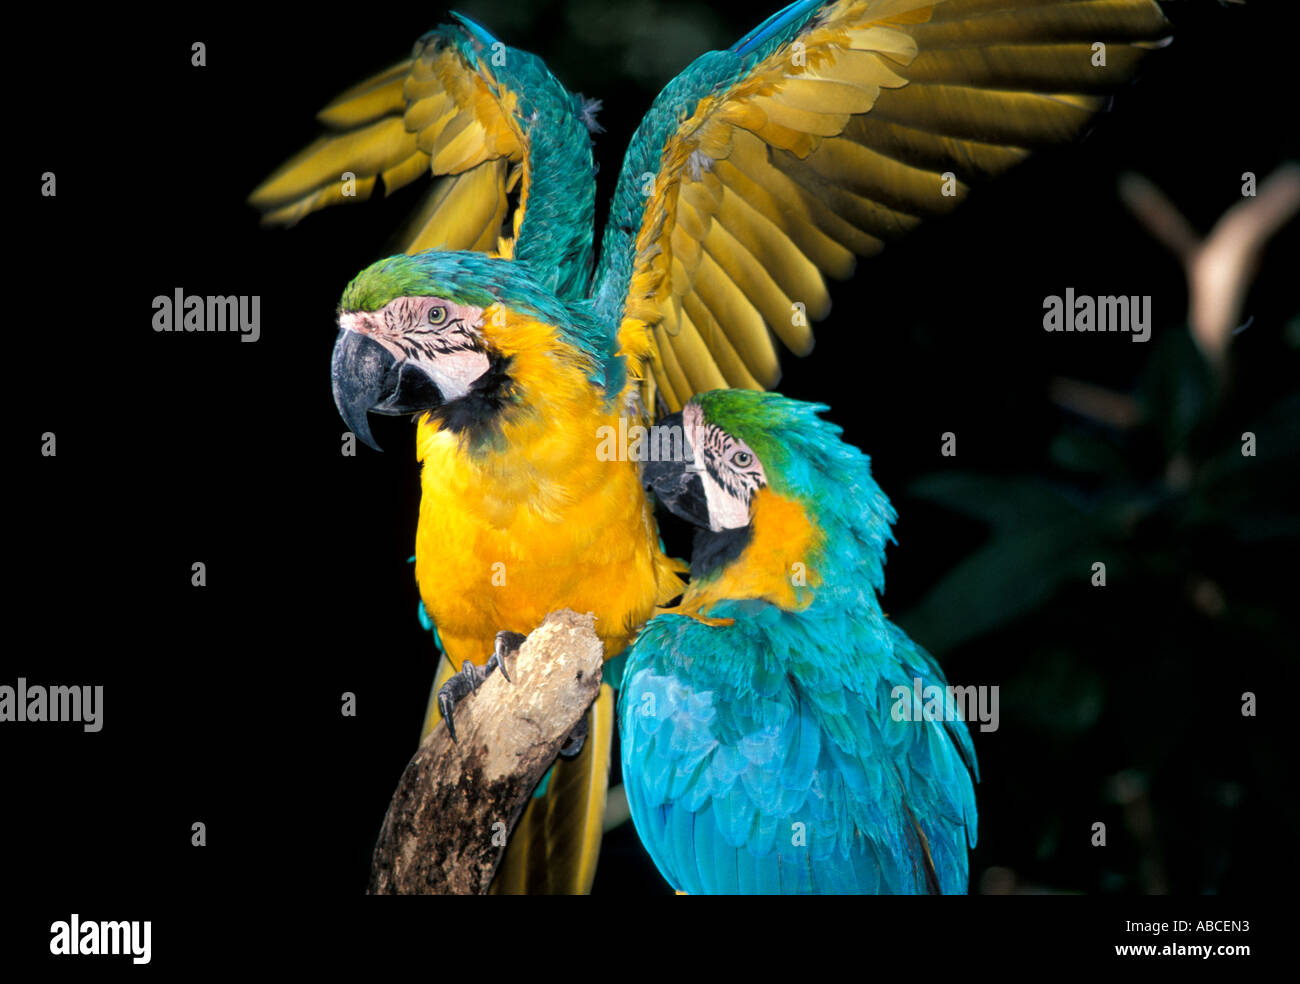 Tropical Bird parrot two pair blue and yellow gold macaws Stock Photo